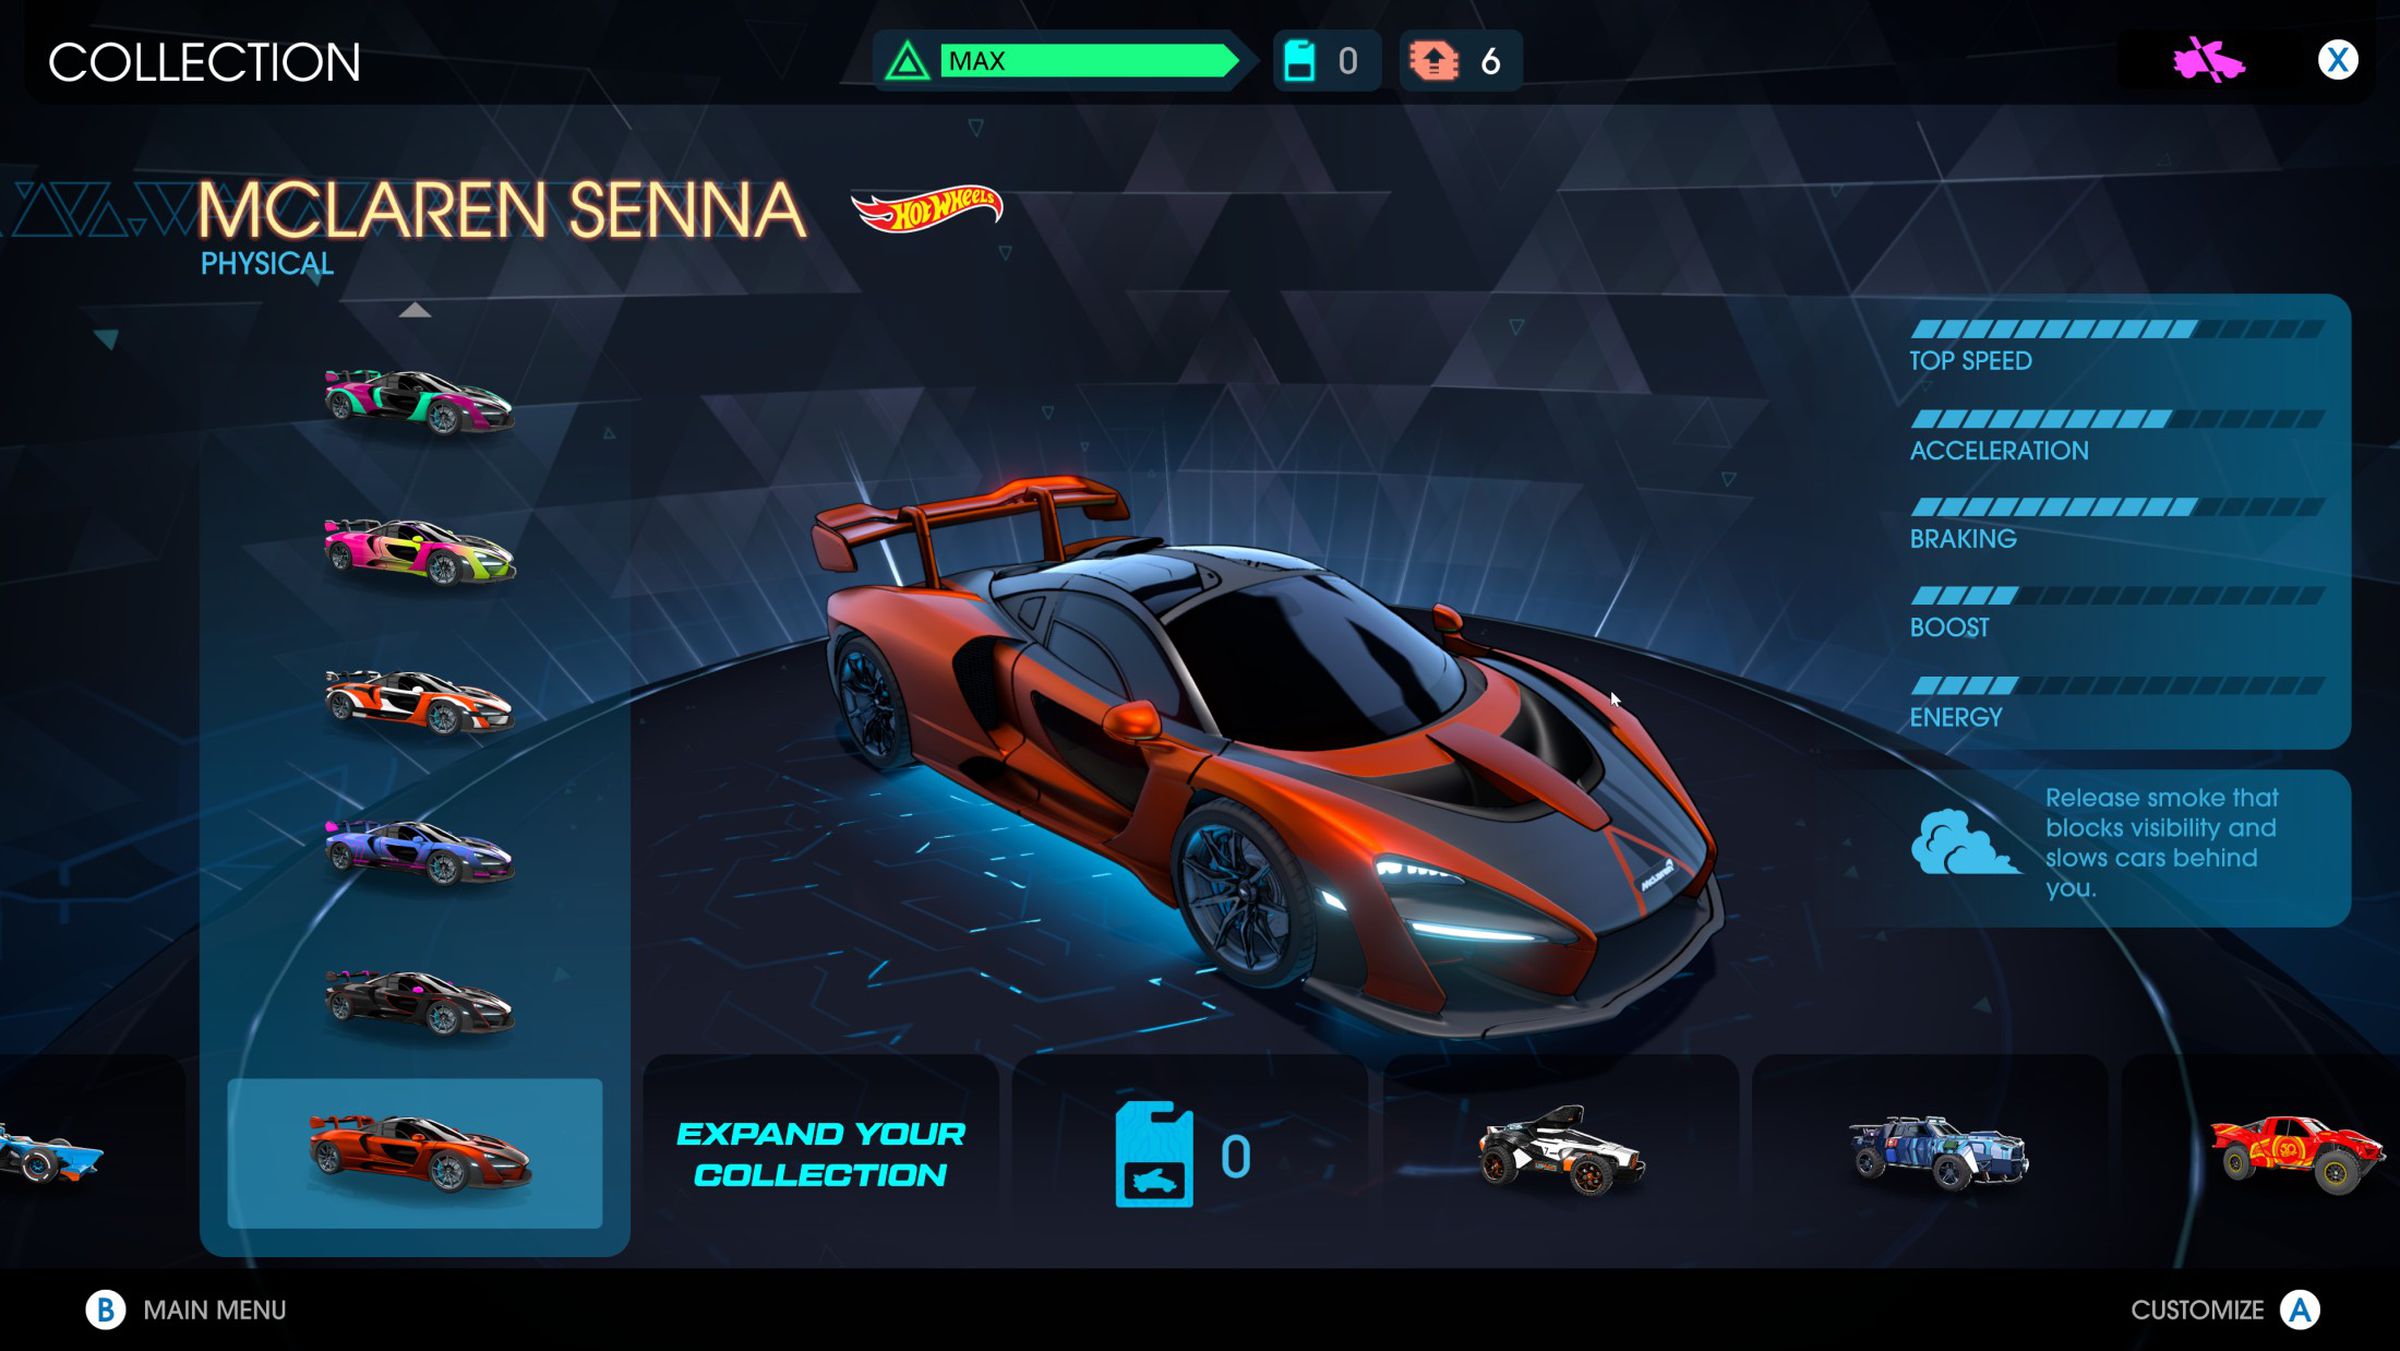 The Senna, showing off the vehicle collection screen with stats and liveries.